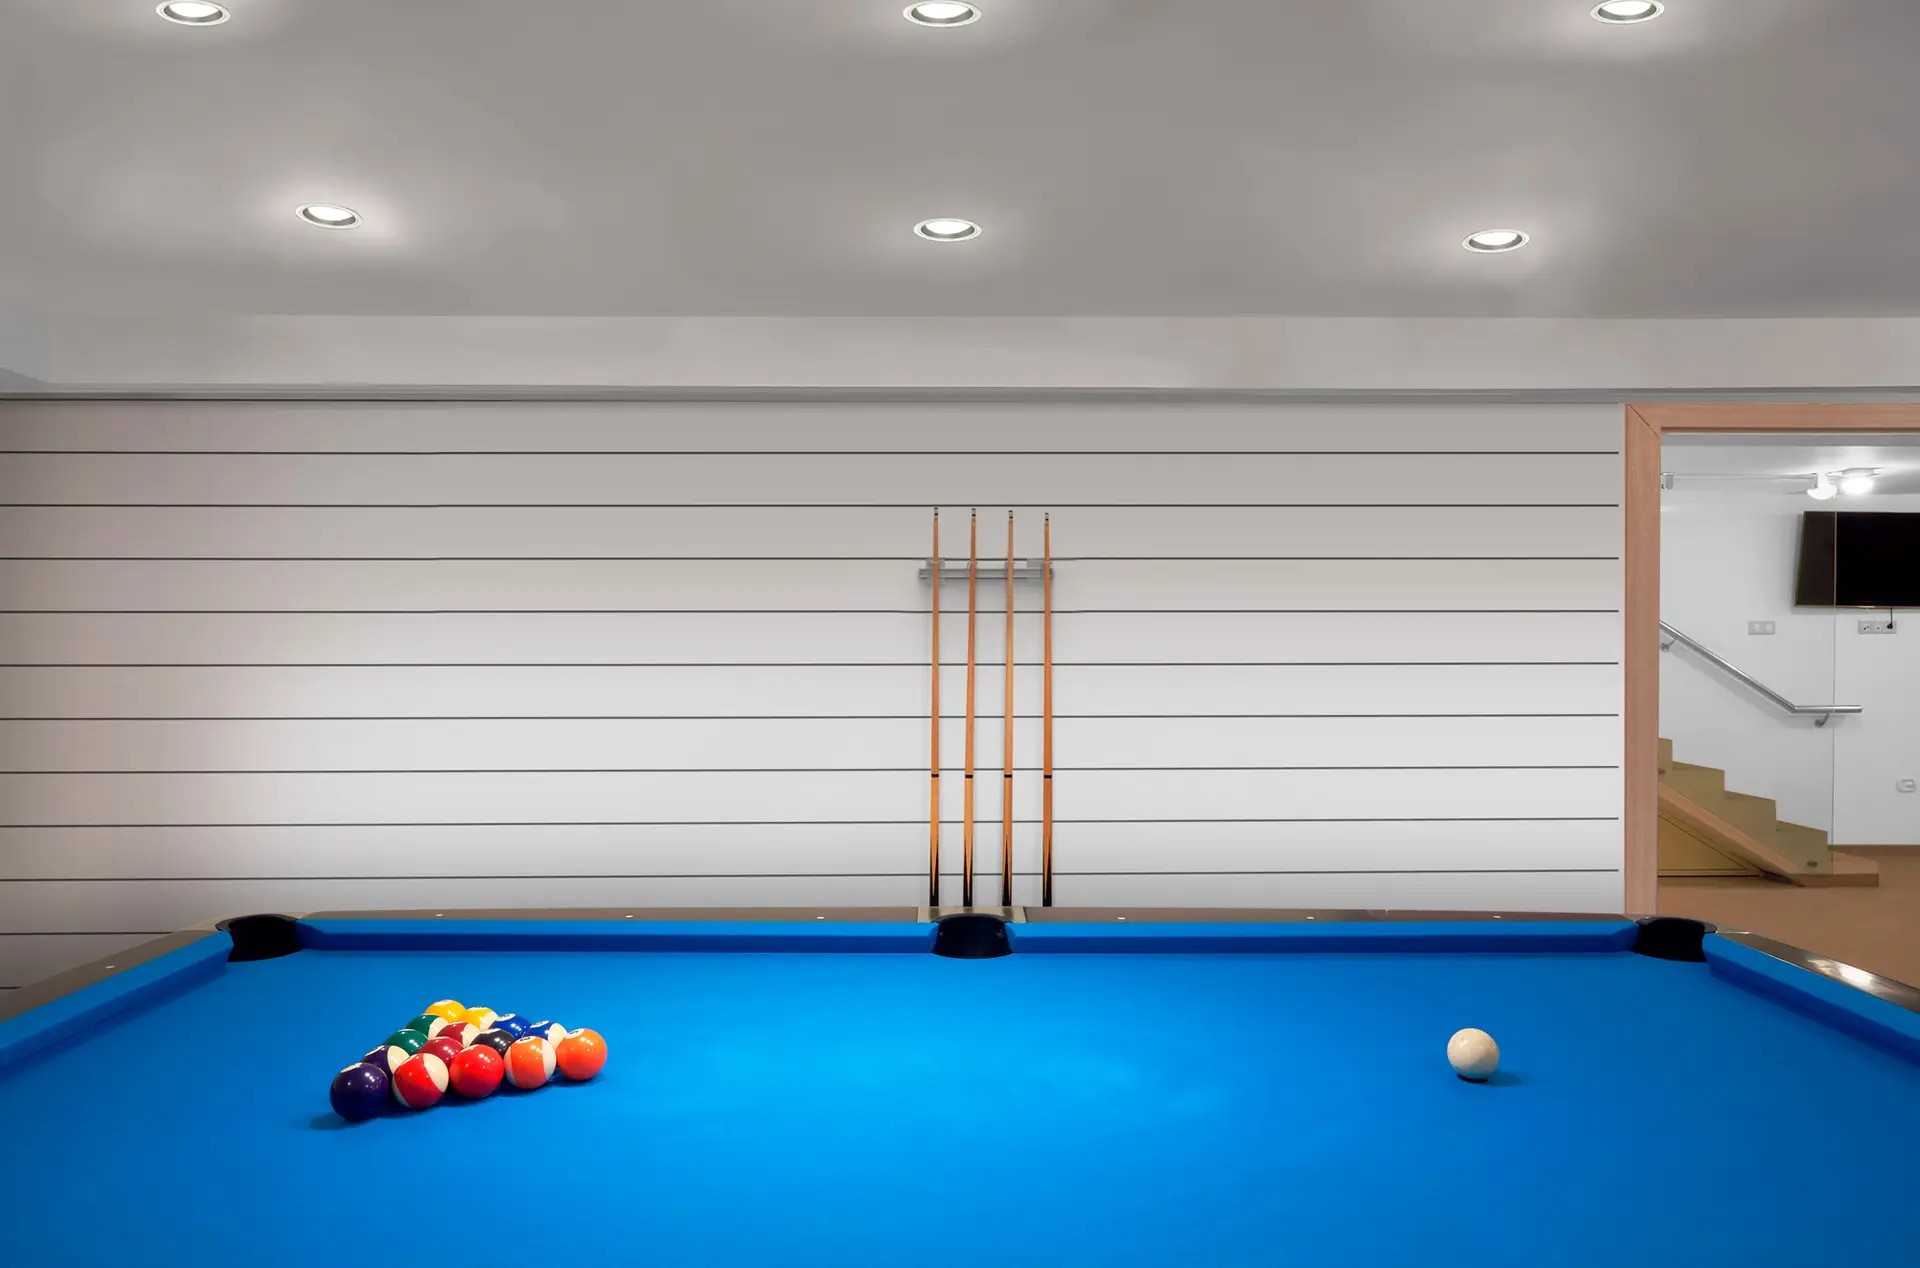 A modern, well-lit game room featuring a blue felt billiards table with a triangle of racked balls and a cue ball. Four pool cues are mounted on the wall in the background. Once just a storage space, this stunning area is the result of an impressive garage renovation, showcasing both style and functionality.